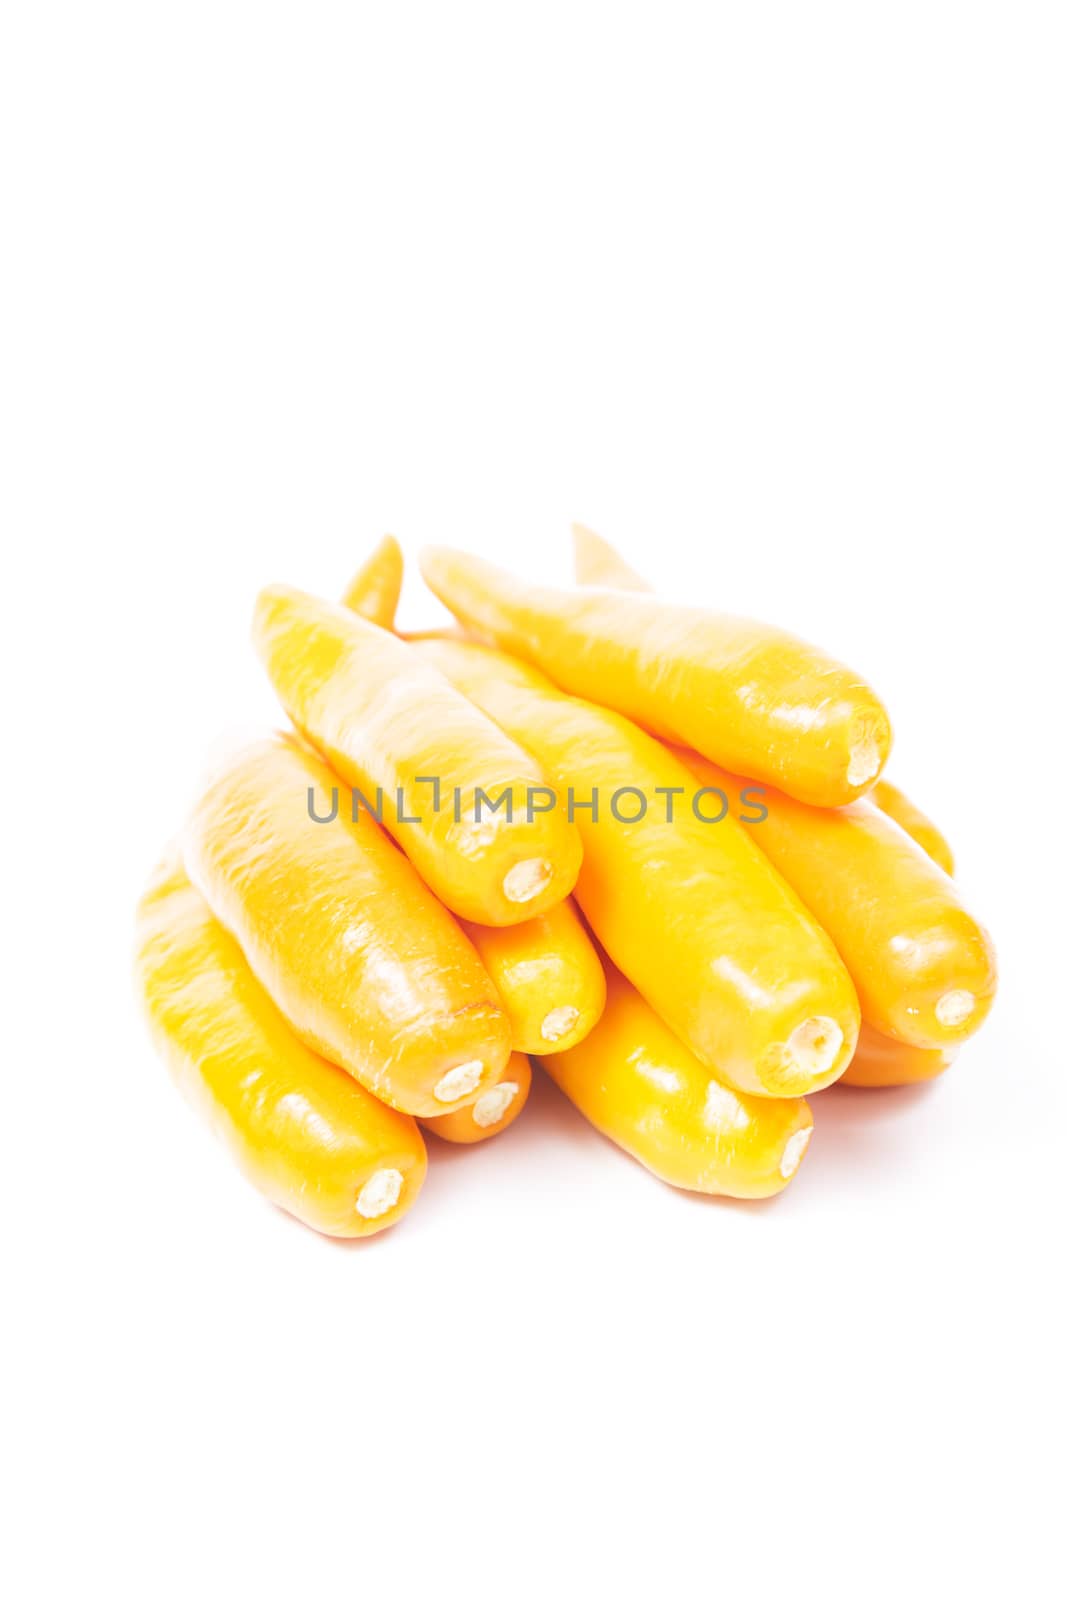 Sweet peppers on a white background taken in the studio.